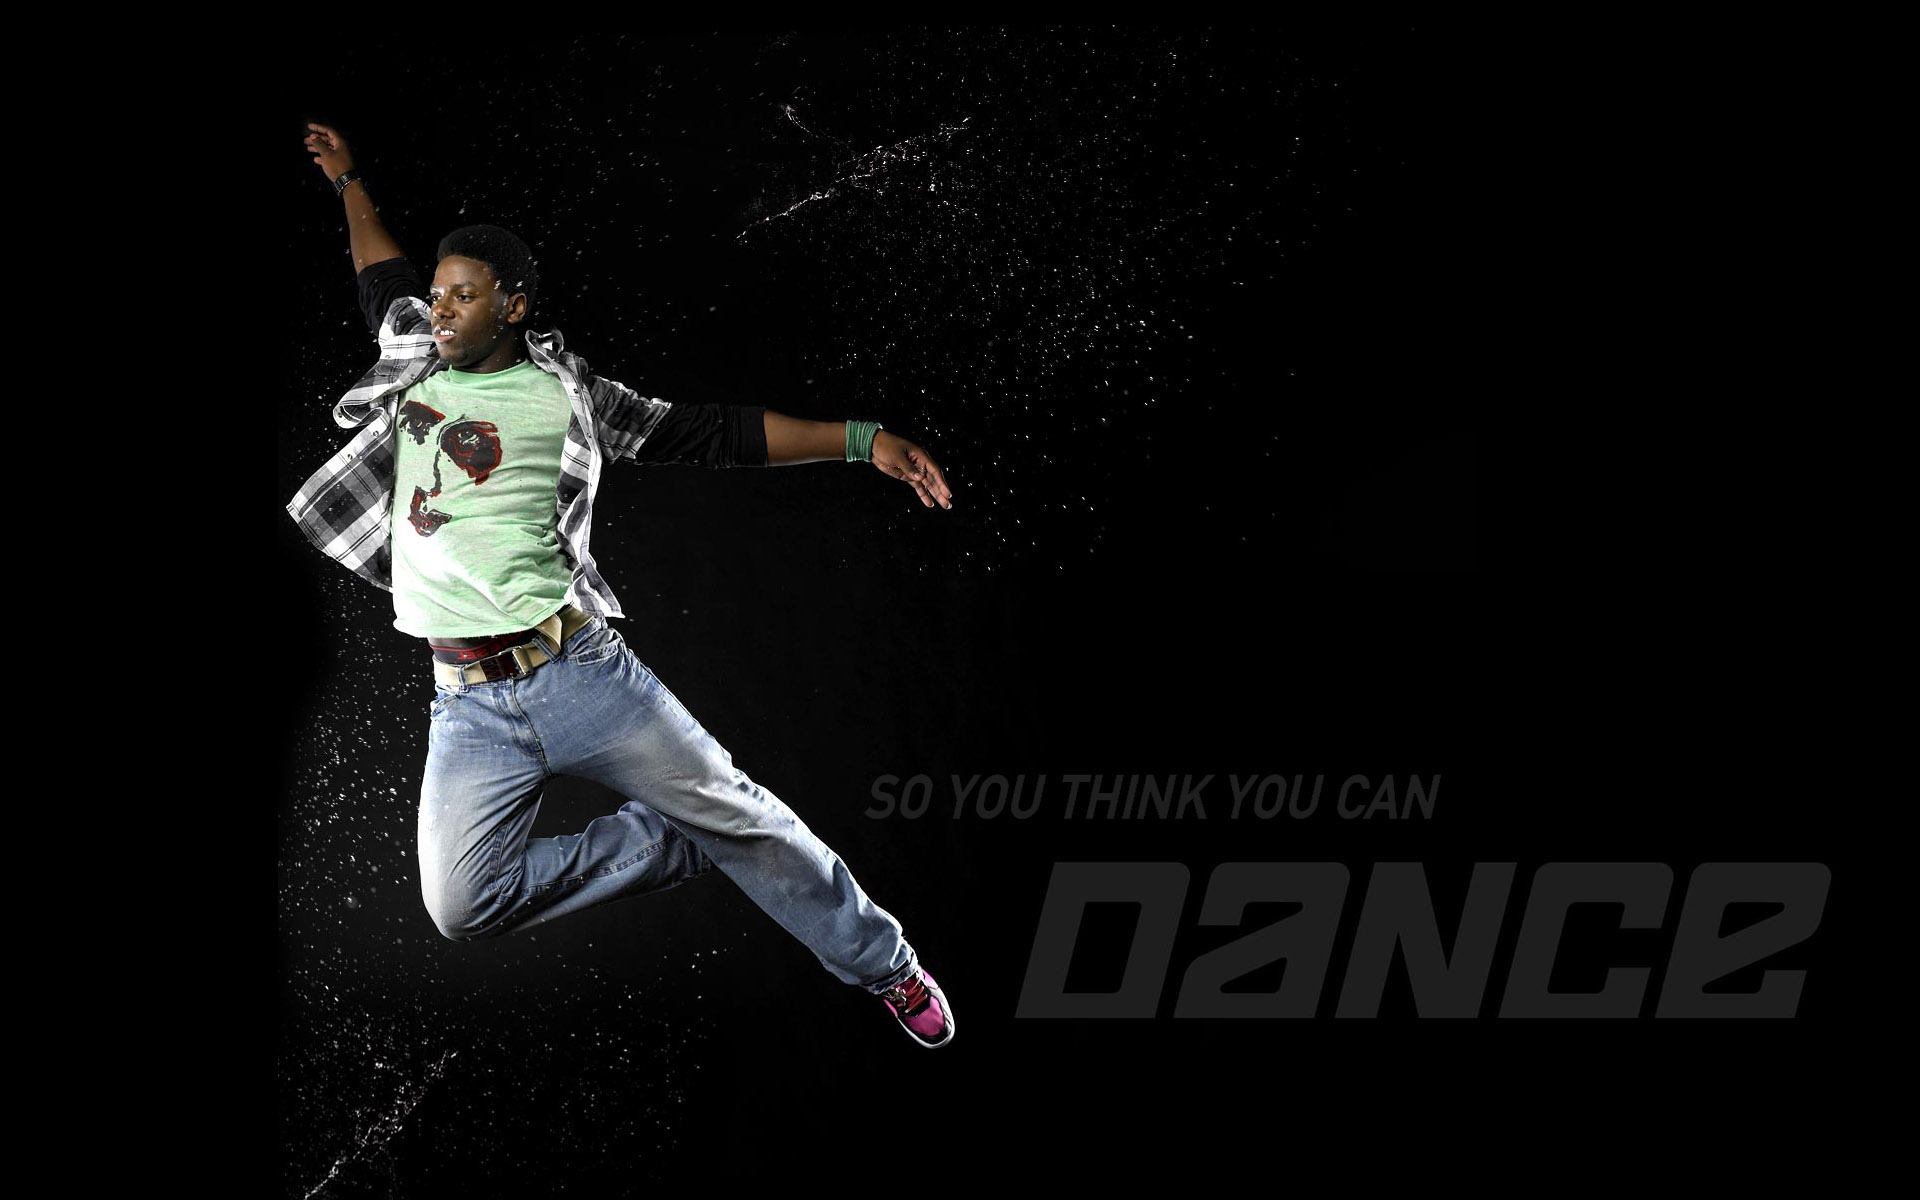 TV Show So You Think You Can Dance HD Wallpaper | Background Image